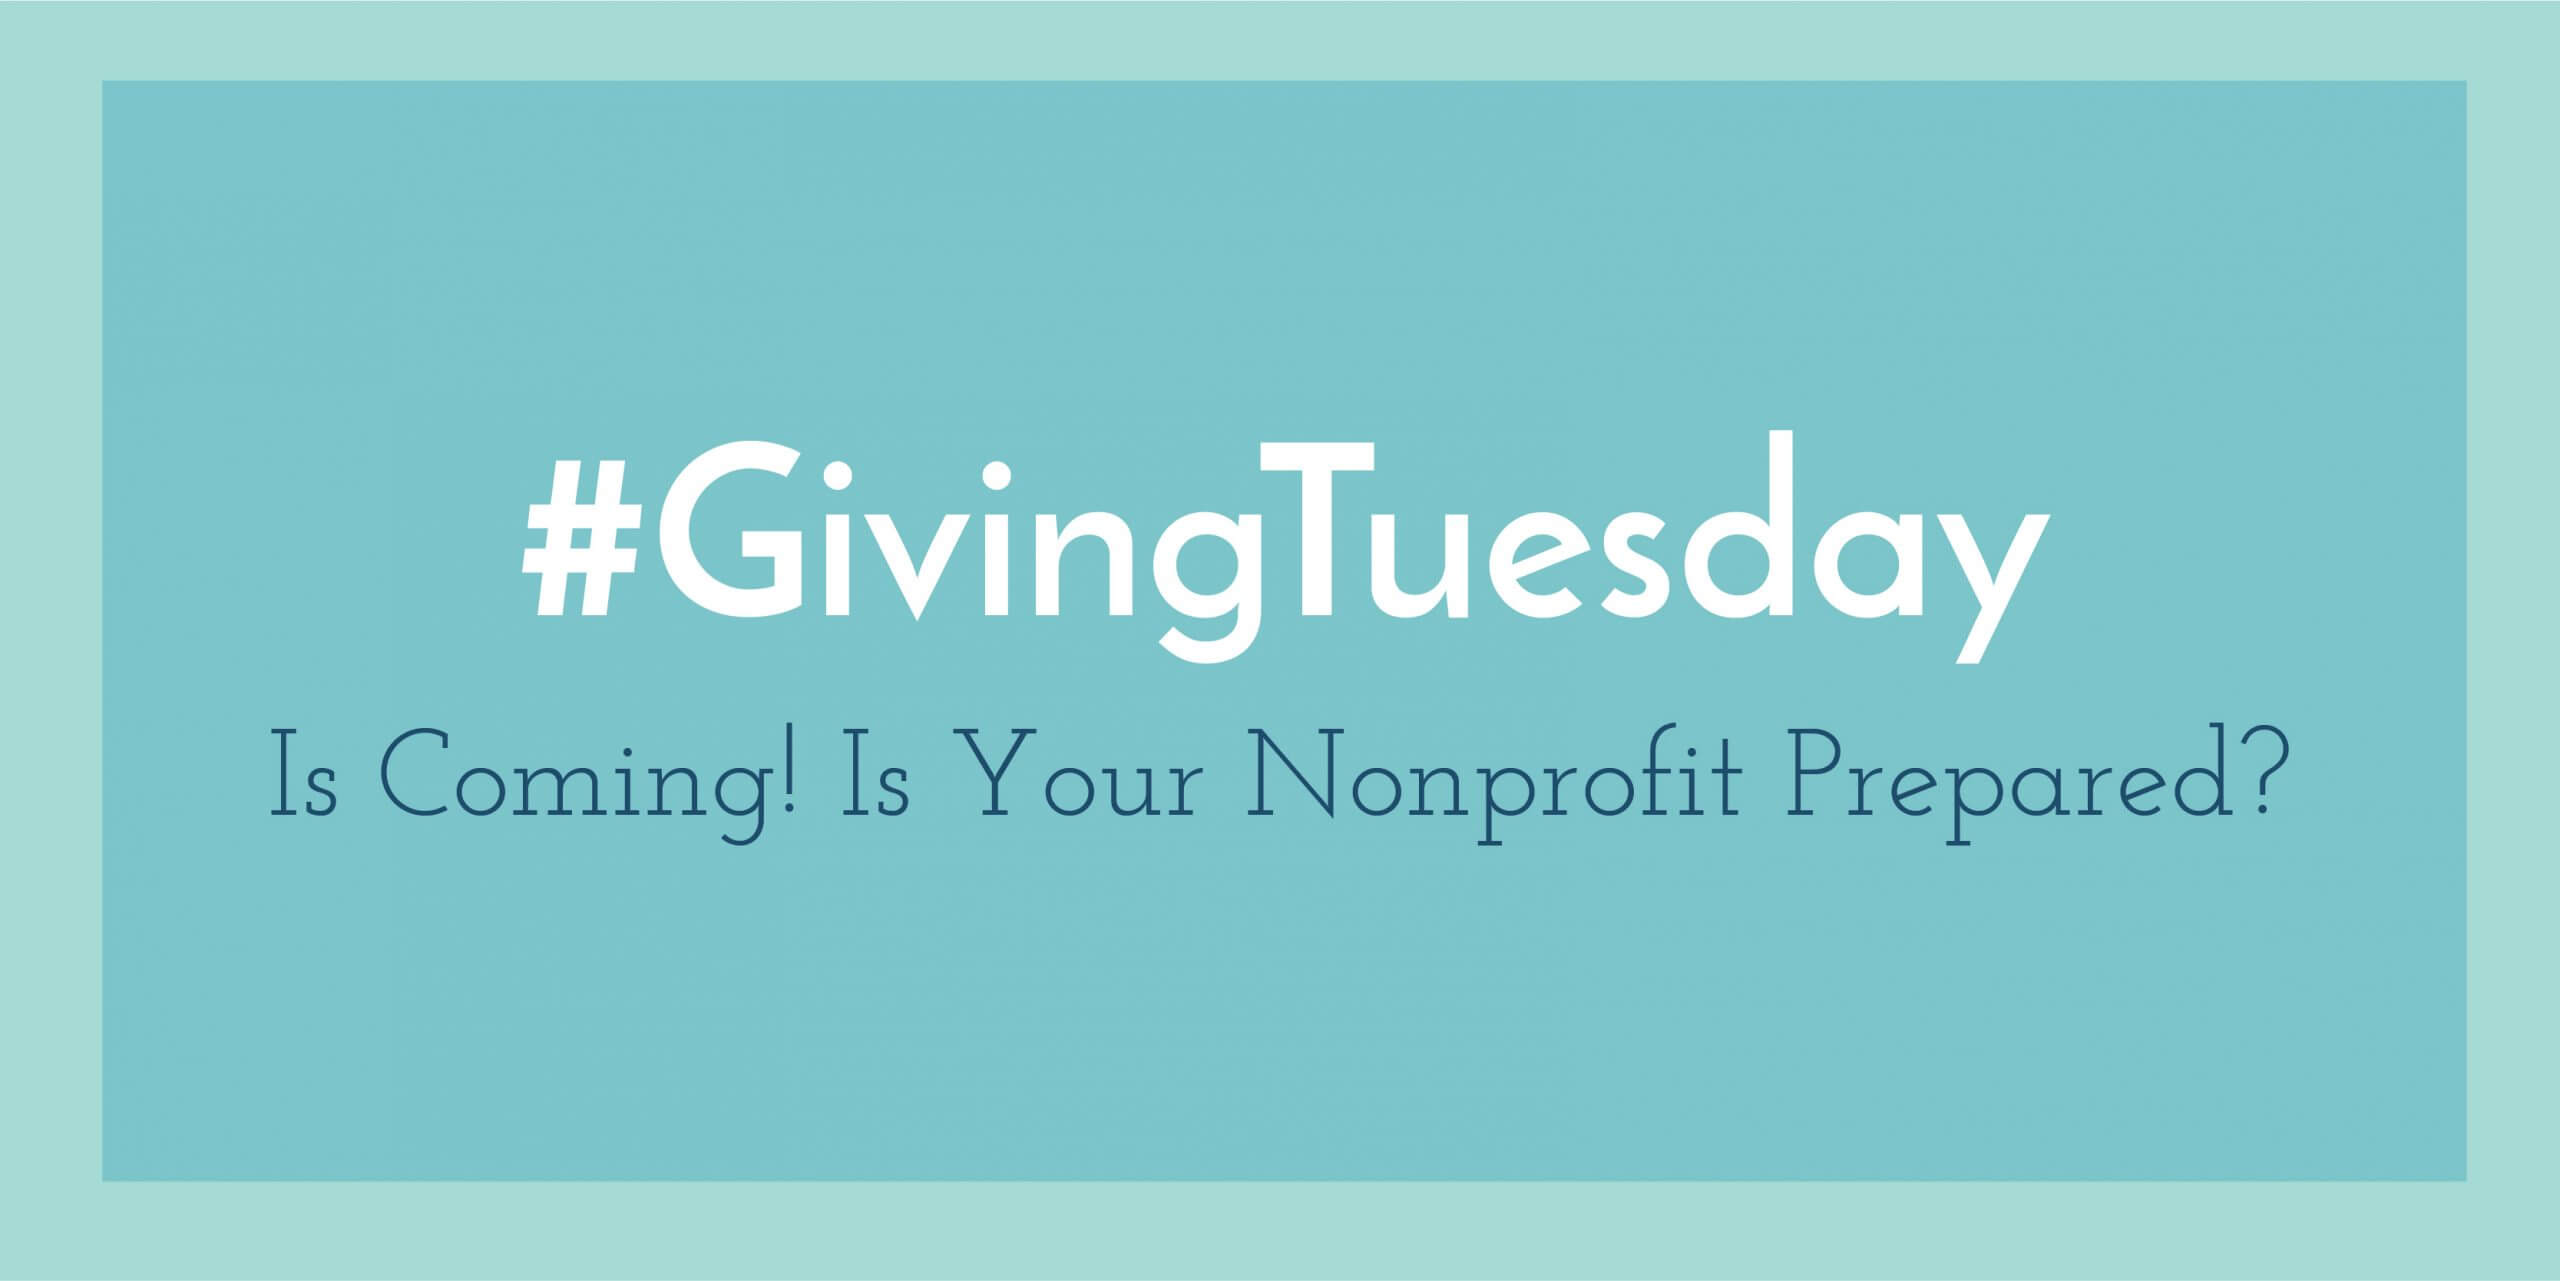 Giving Tuesday is coming!